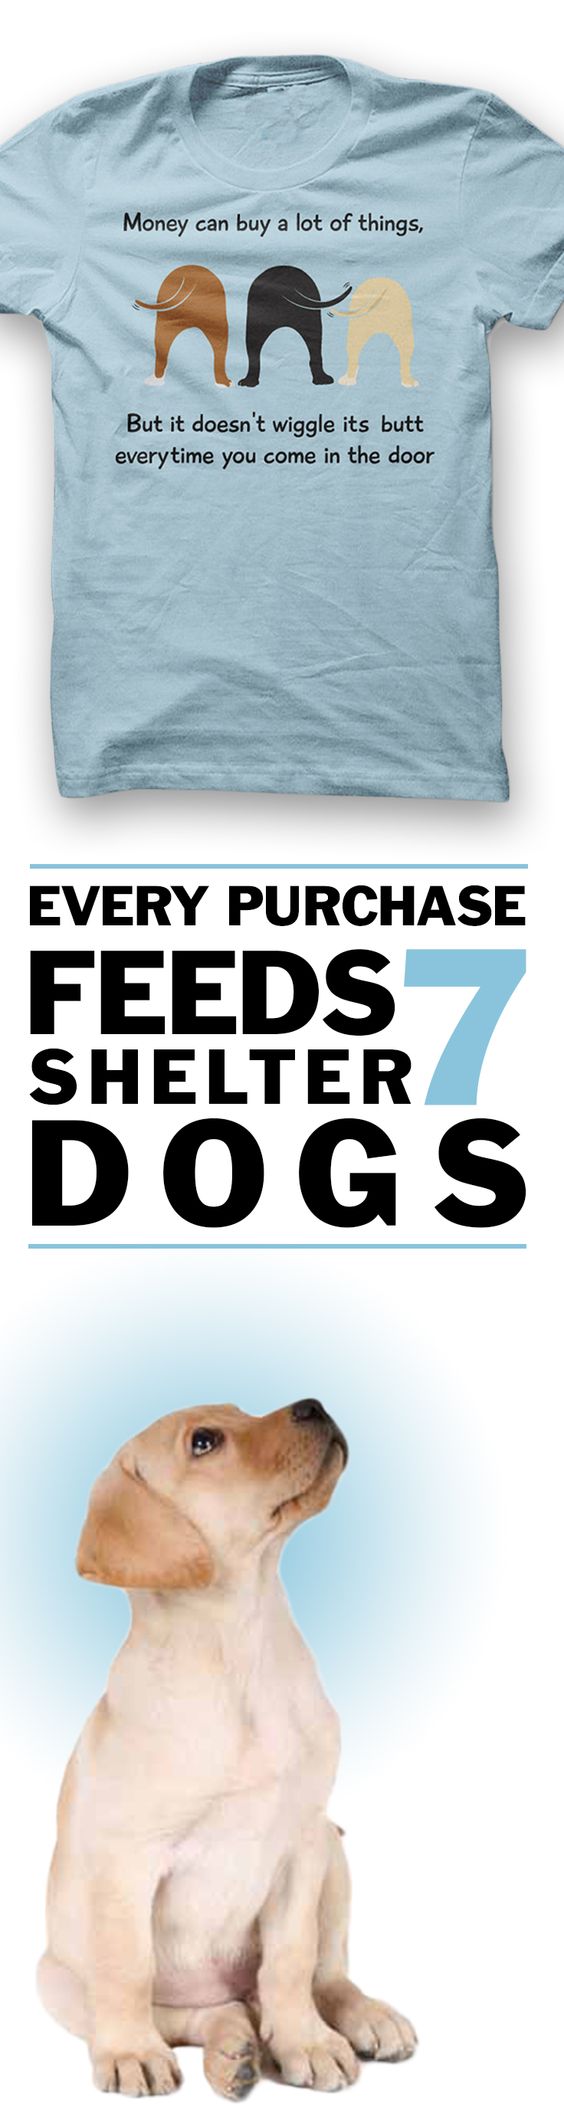 Would you wear this? Every purchase feeds 7 shelter dogs!